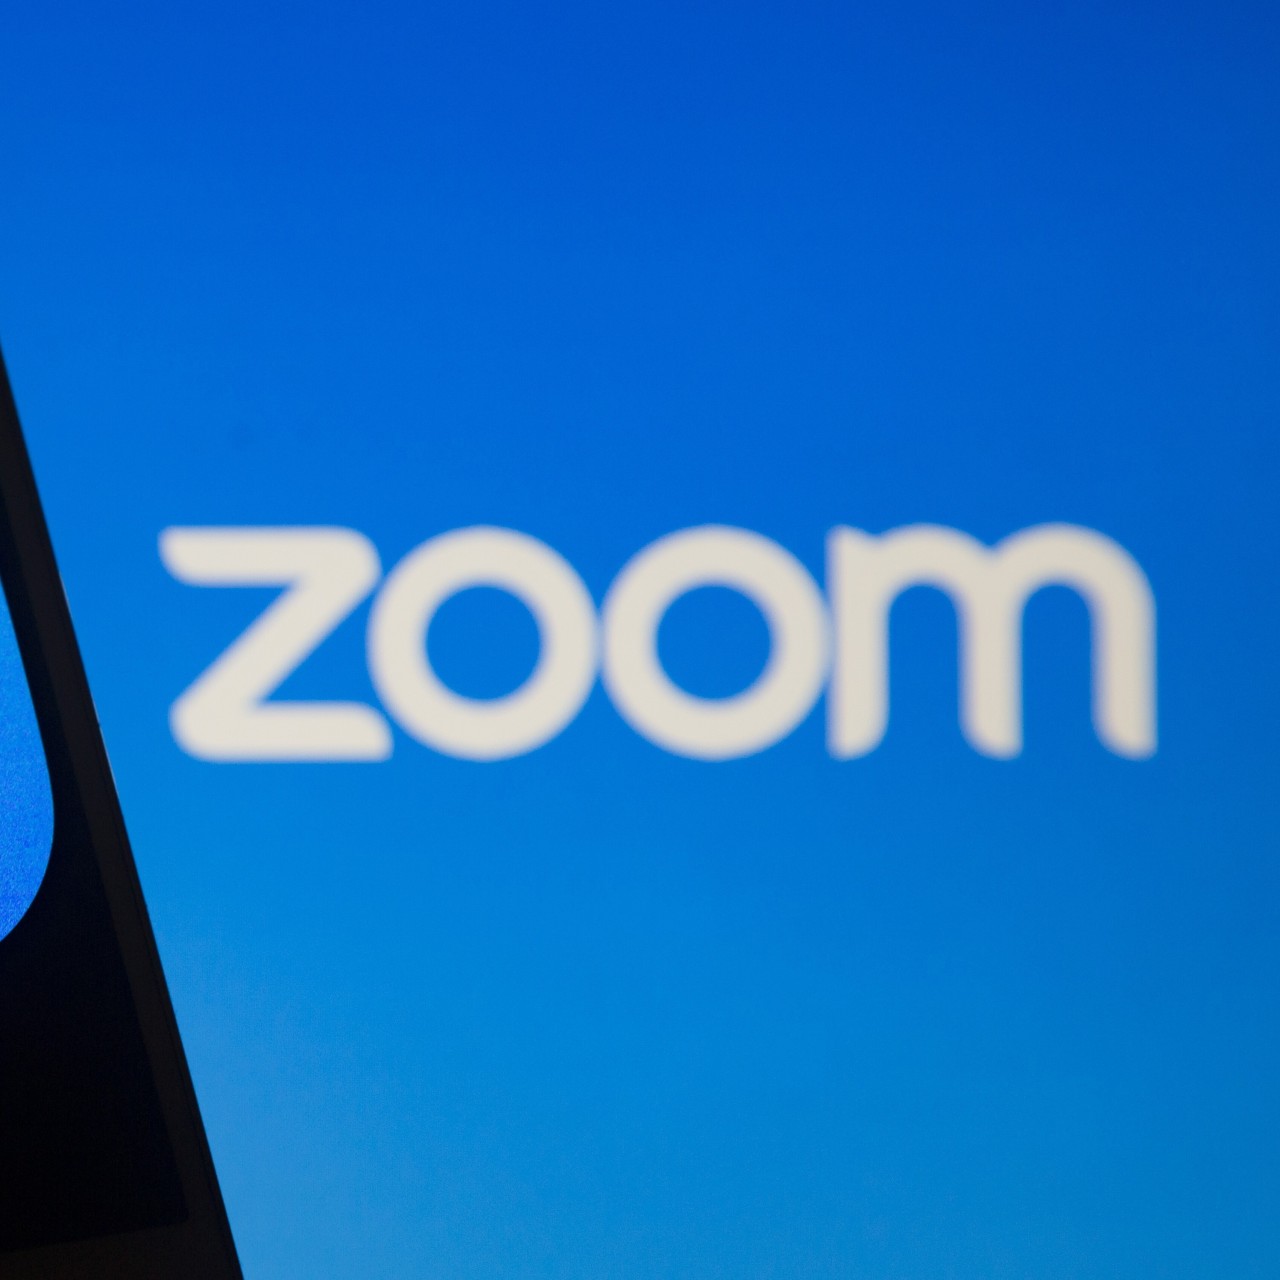 Hong Kong Government And Schools In Talks Over Zoom Security